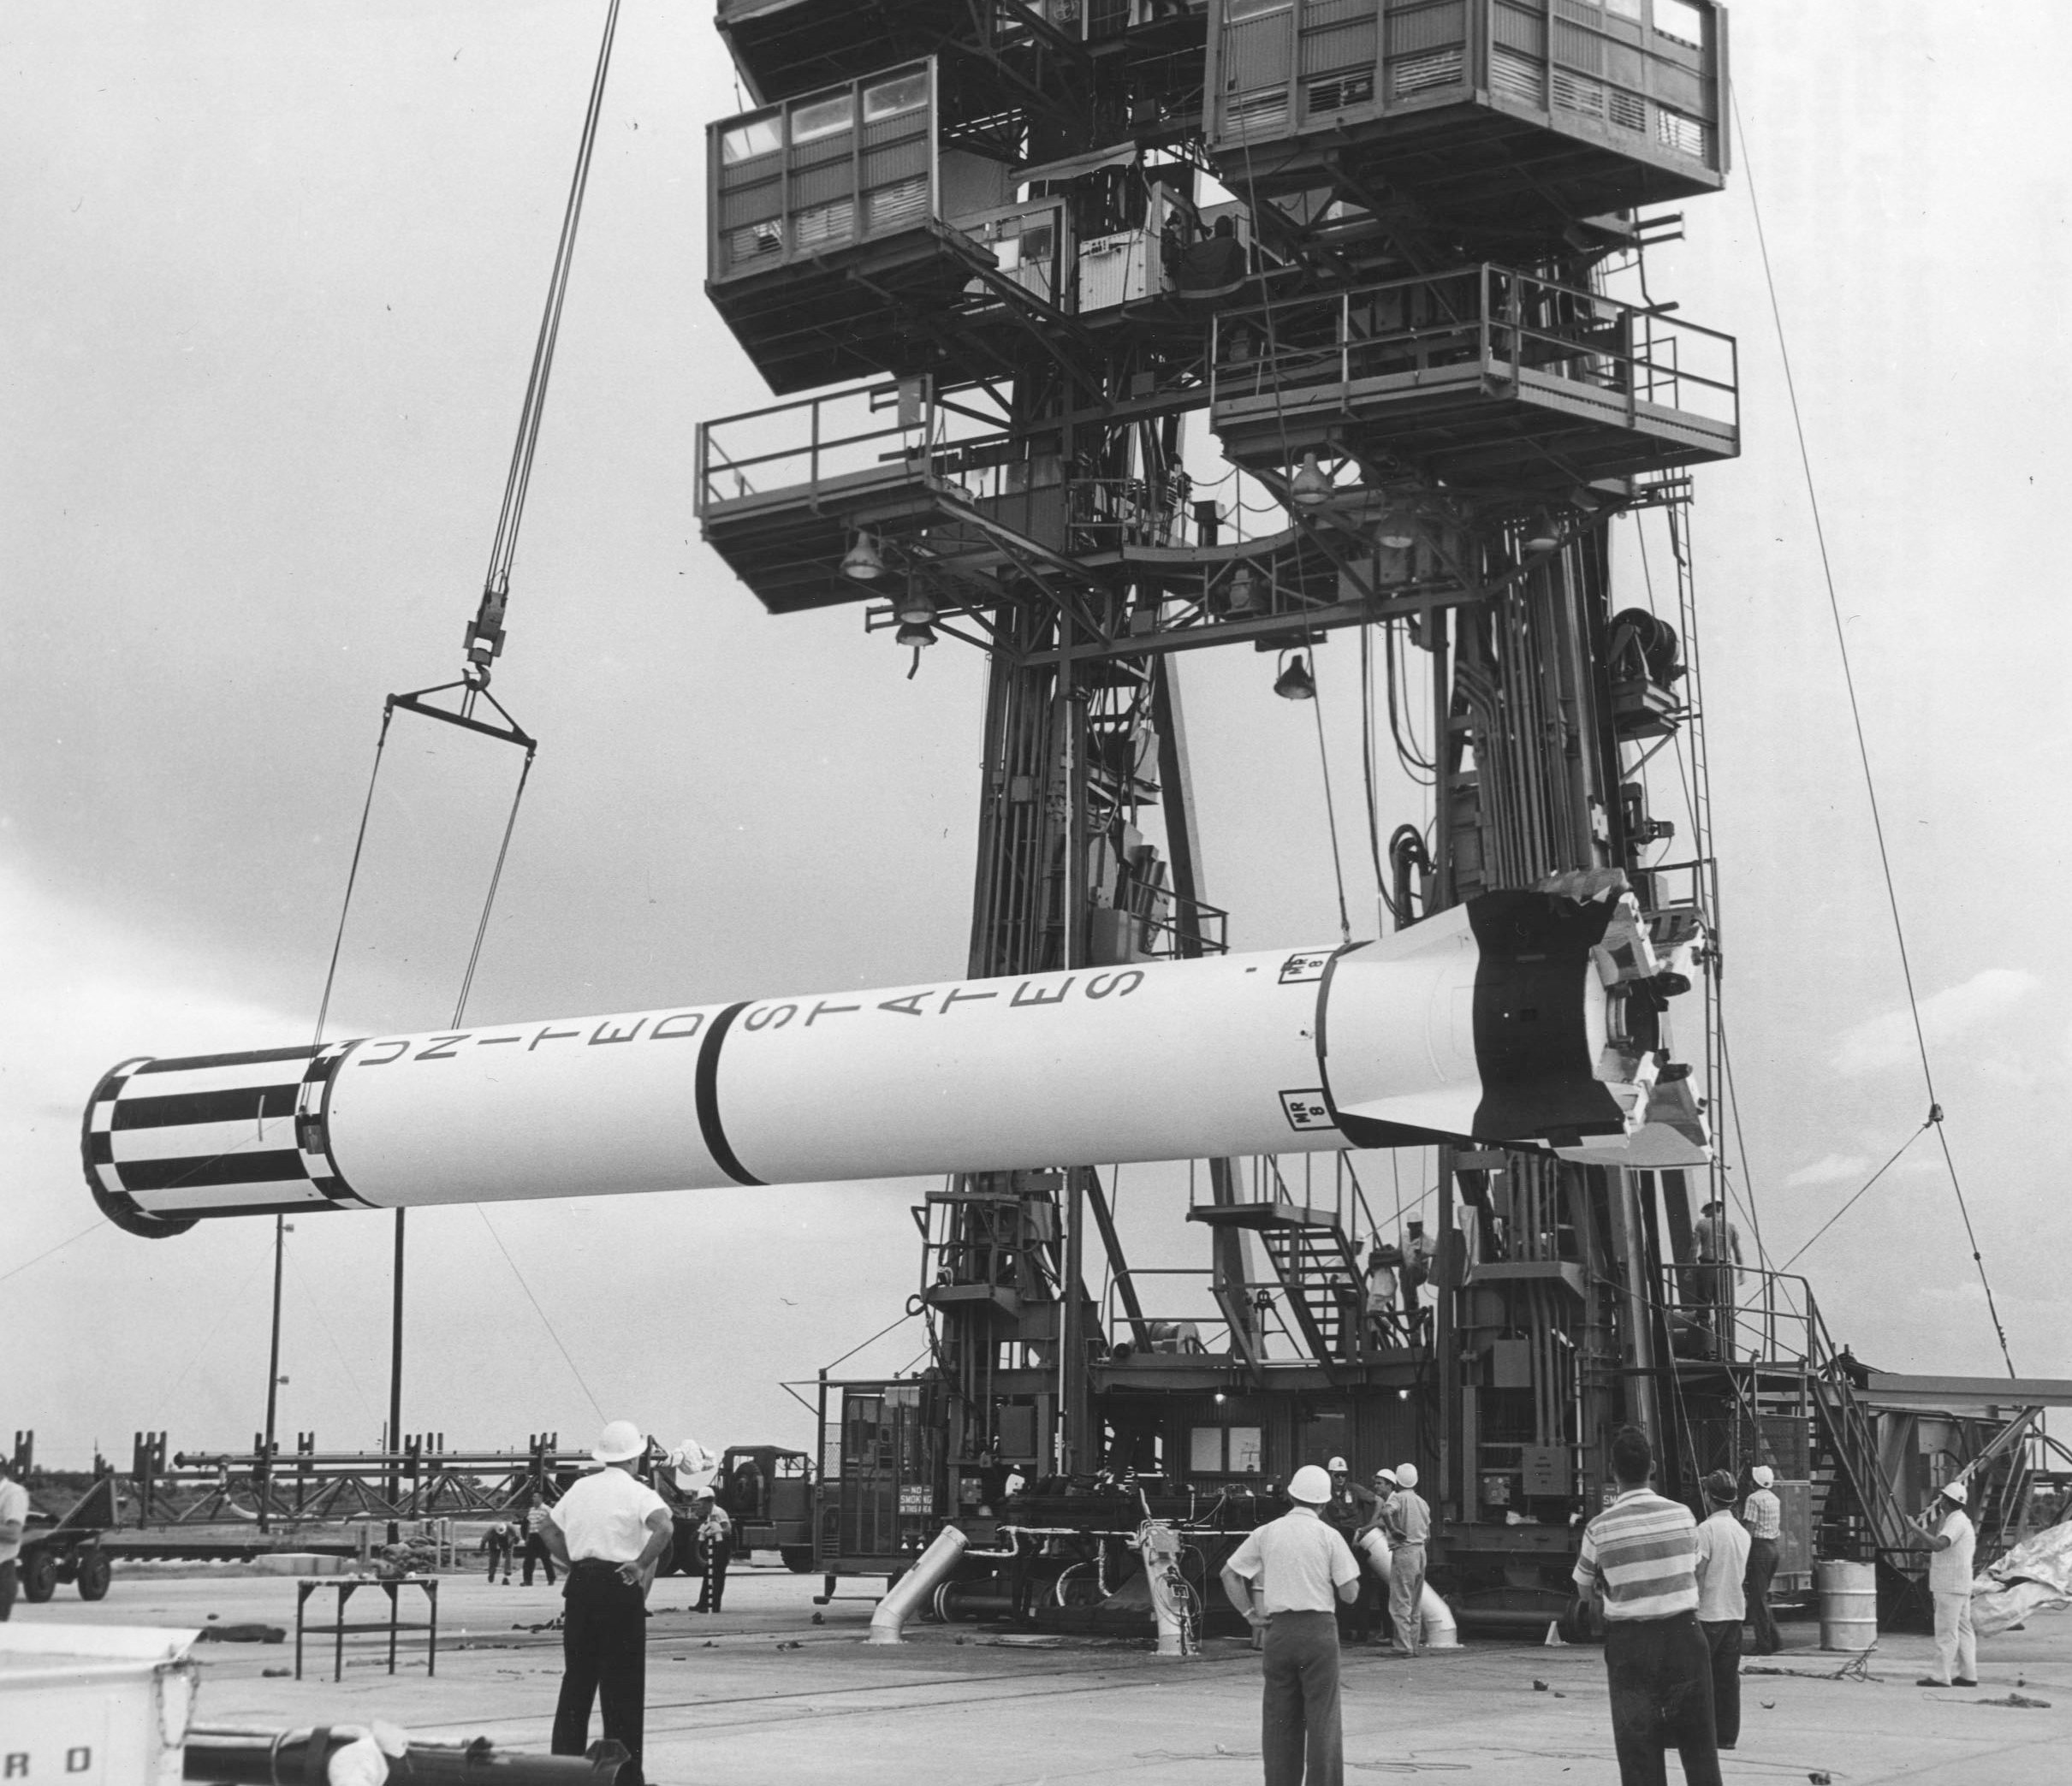 The Mercury-Redstone booster for flight Mercury-Redstone 4 (MR-4) is here being erected on the launch pad in Spring 1961.